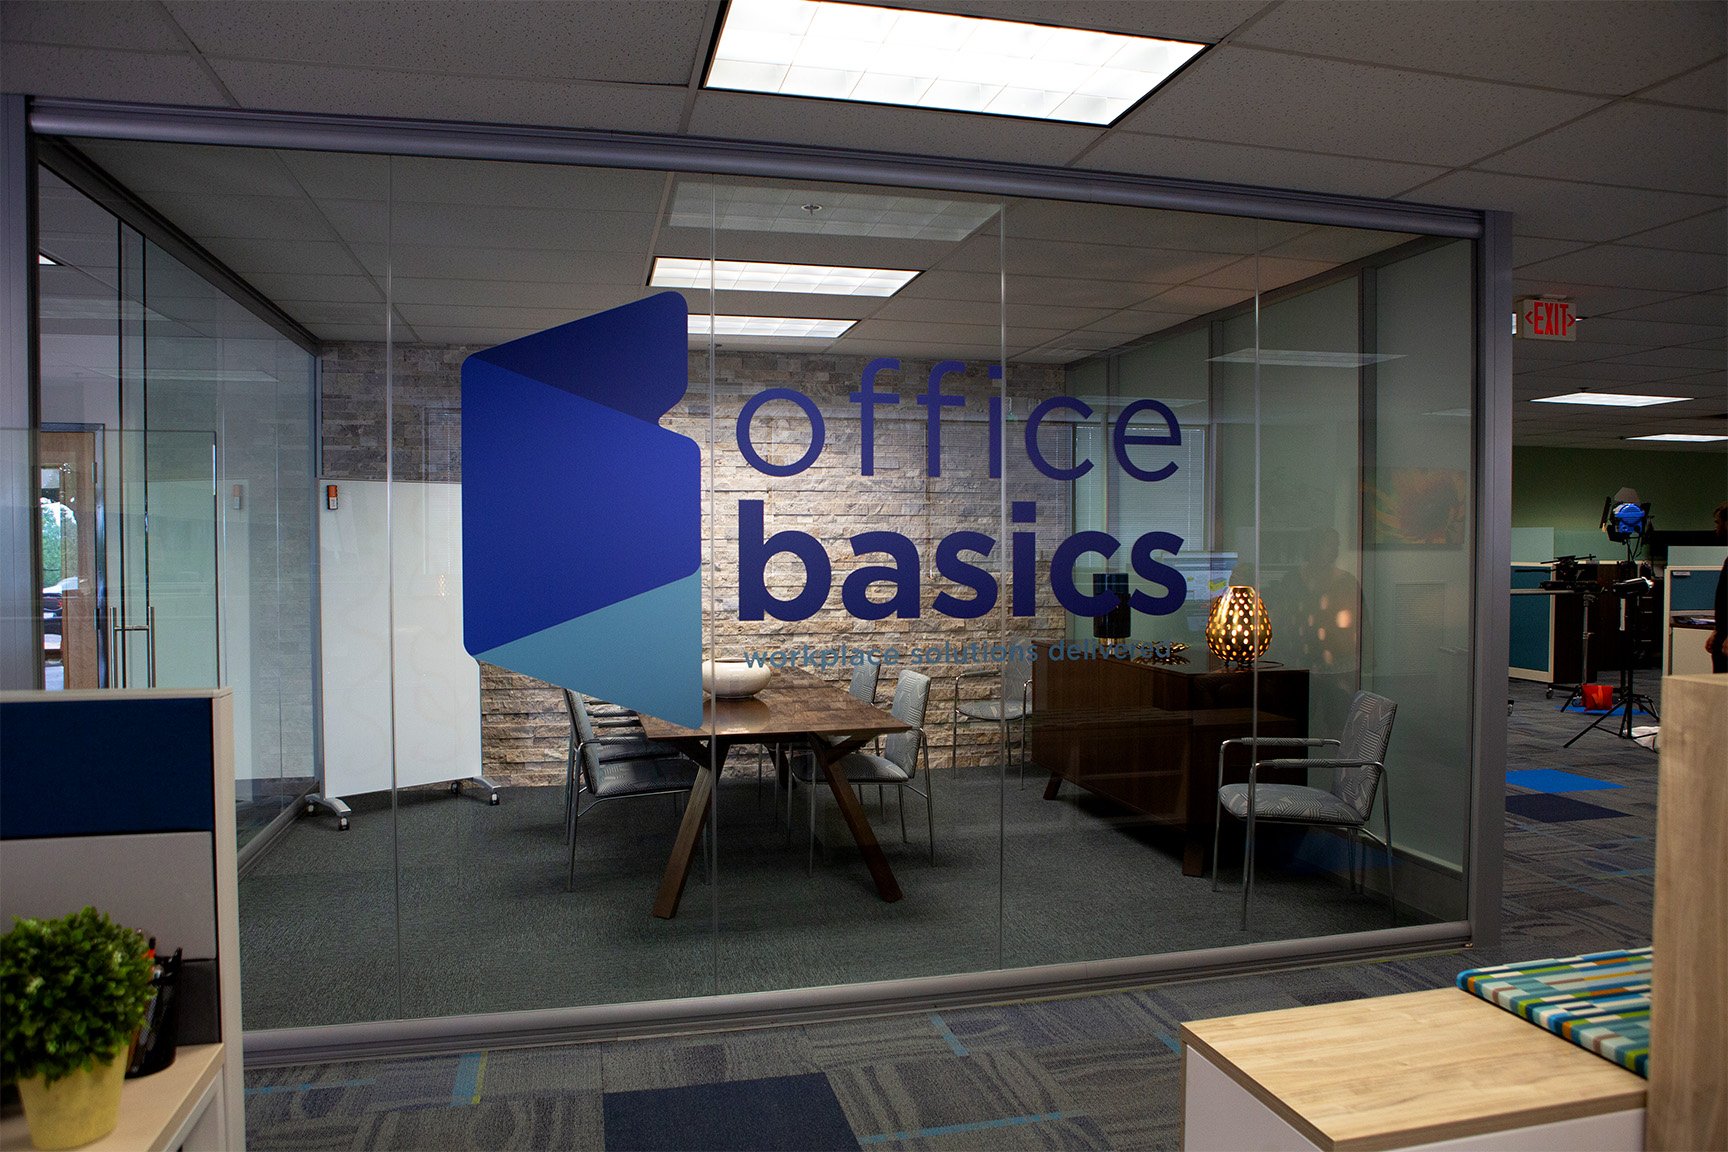 OFFICE PRODUCTS CENTER, INC.: OFFICE SUPPLIES, OFFICE MACHINES